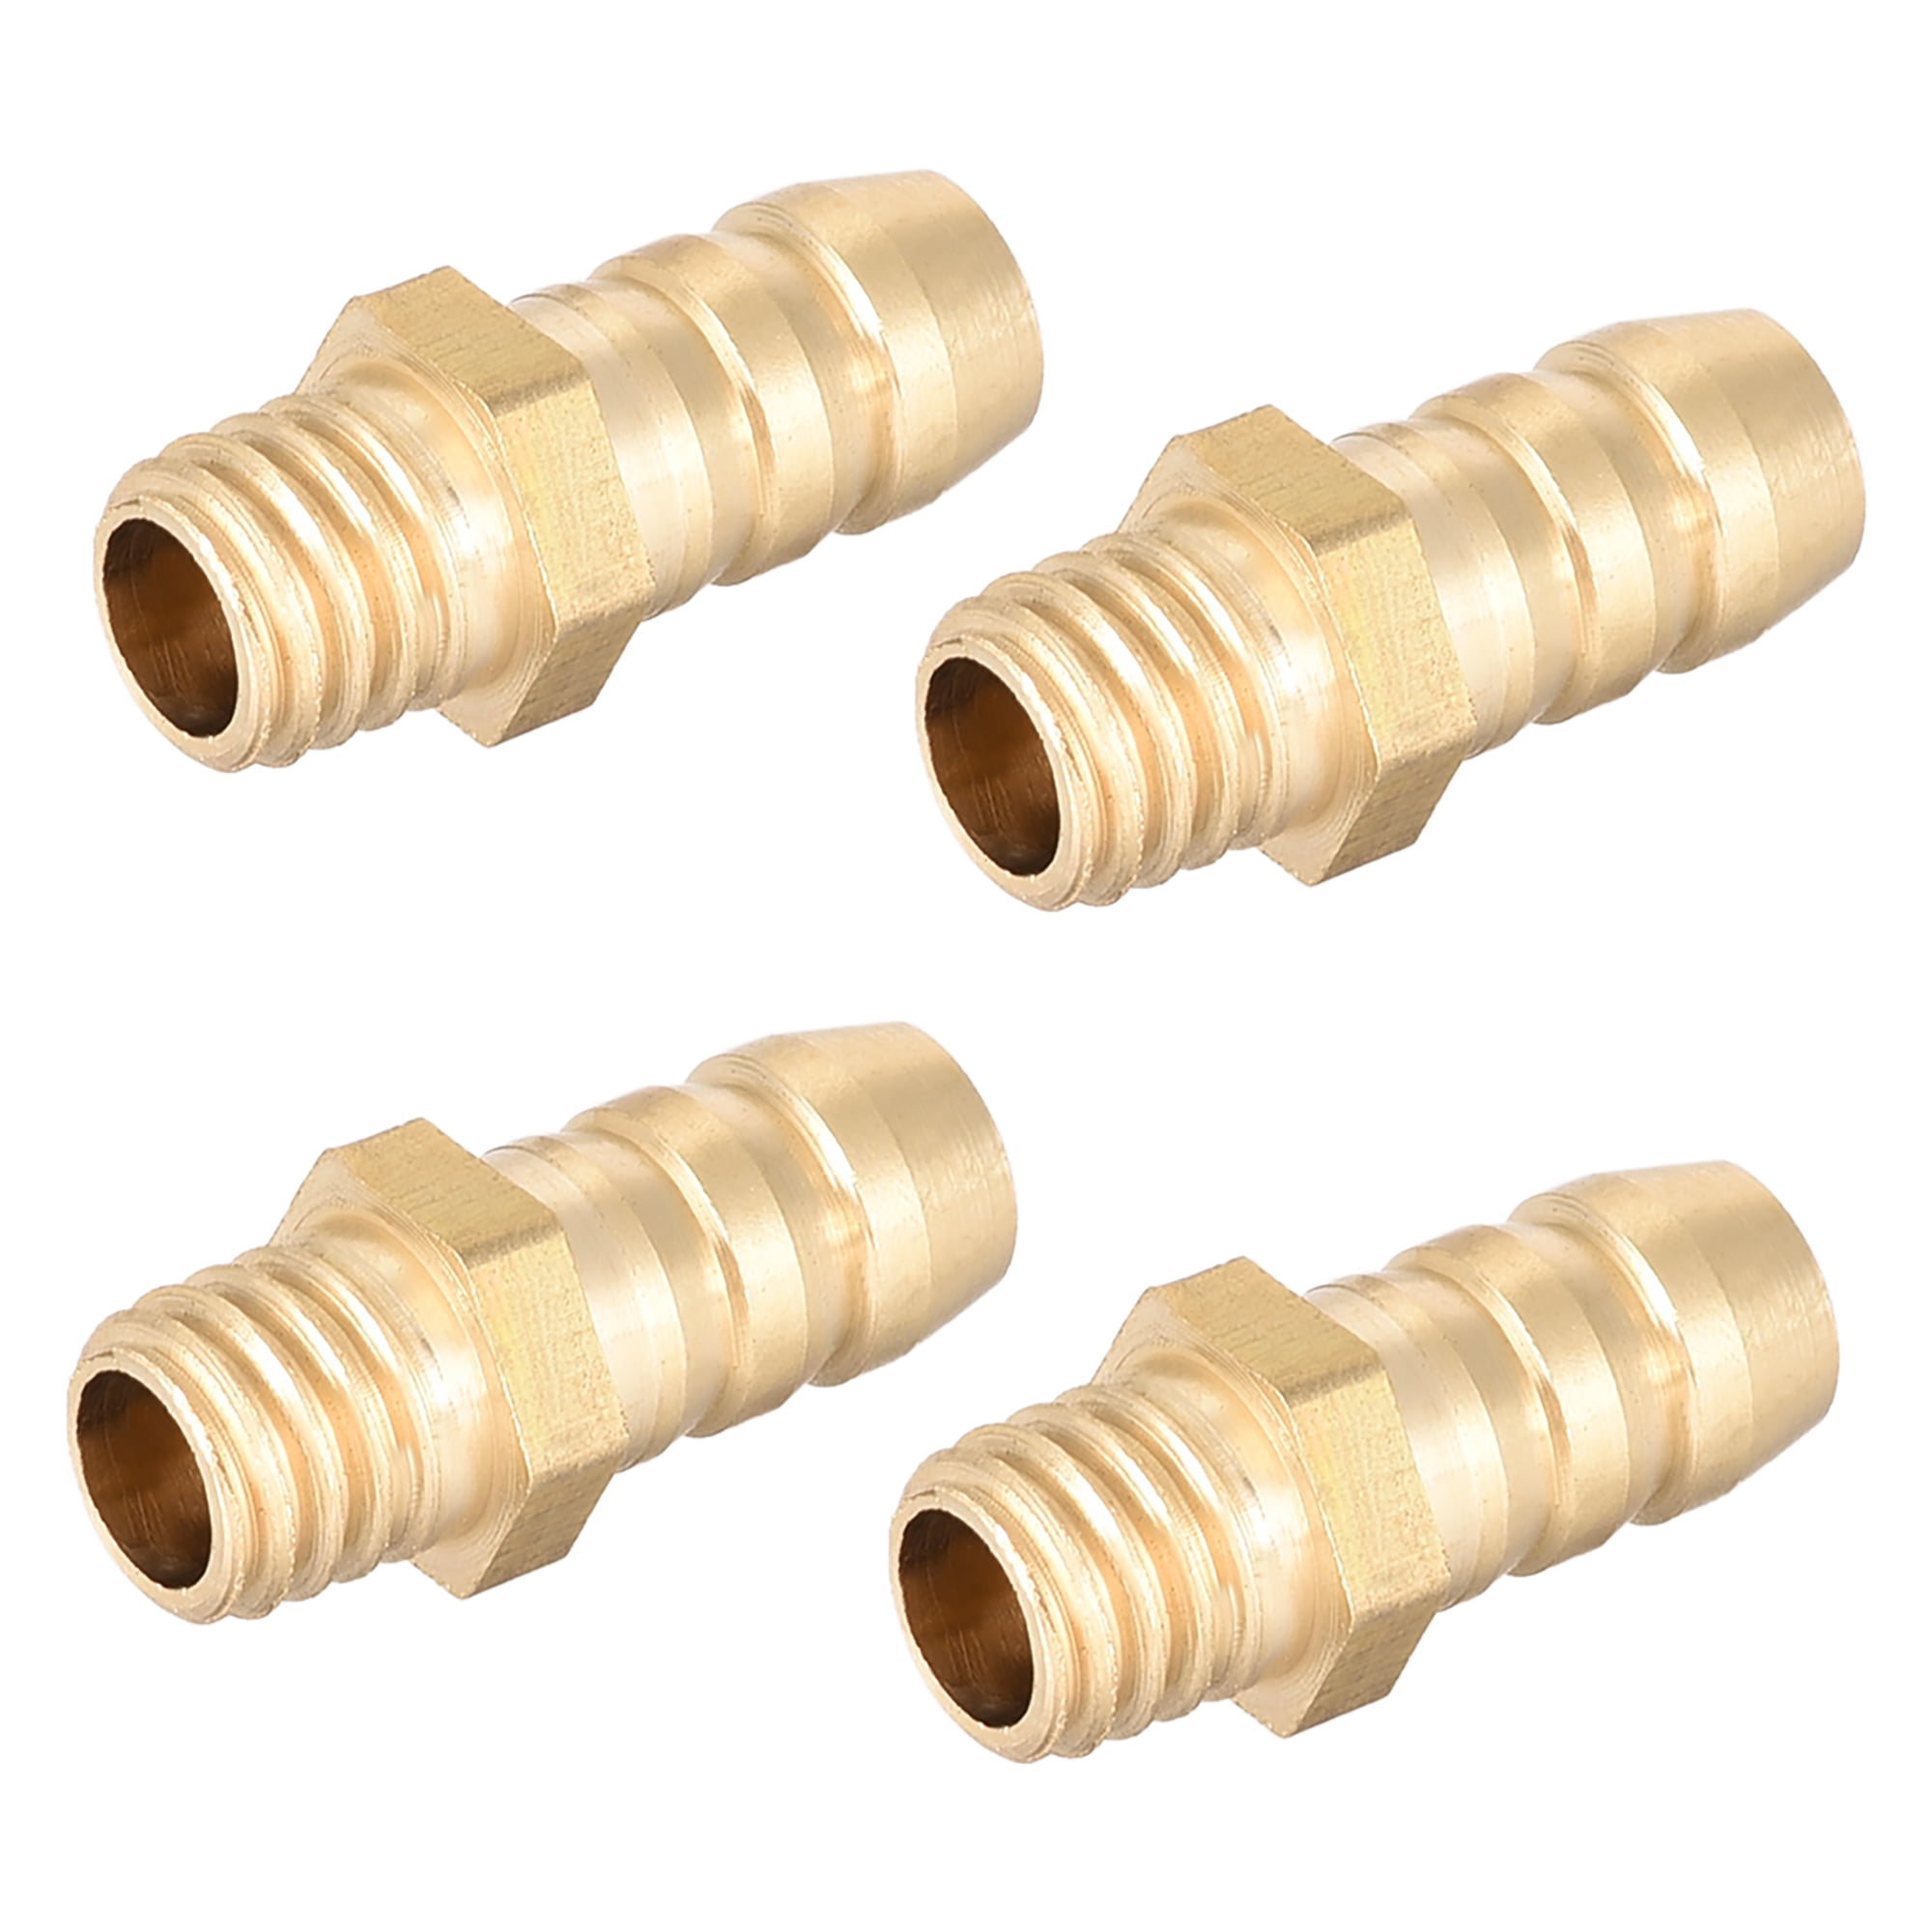 Brass Fitting Connector Metric M12x1.75 Male to Barb Hose ID 12mm 4pcs 